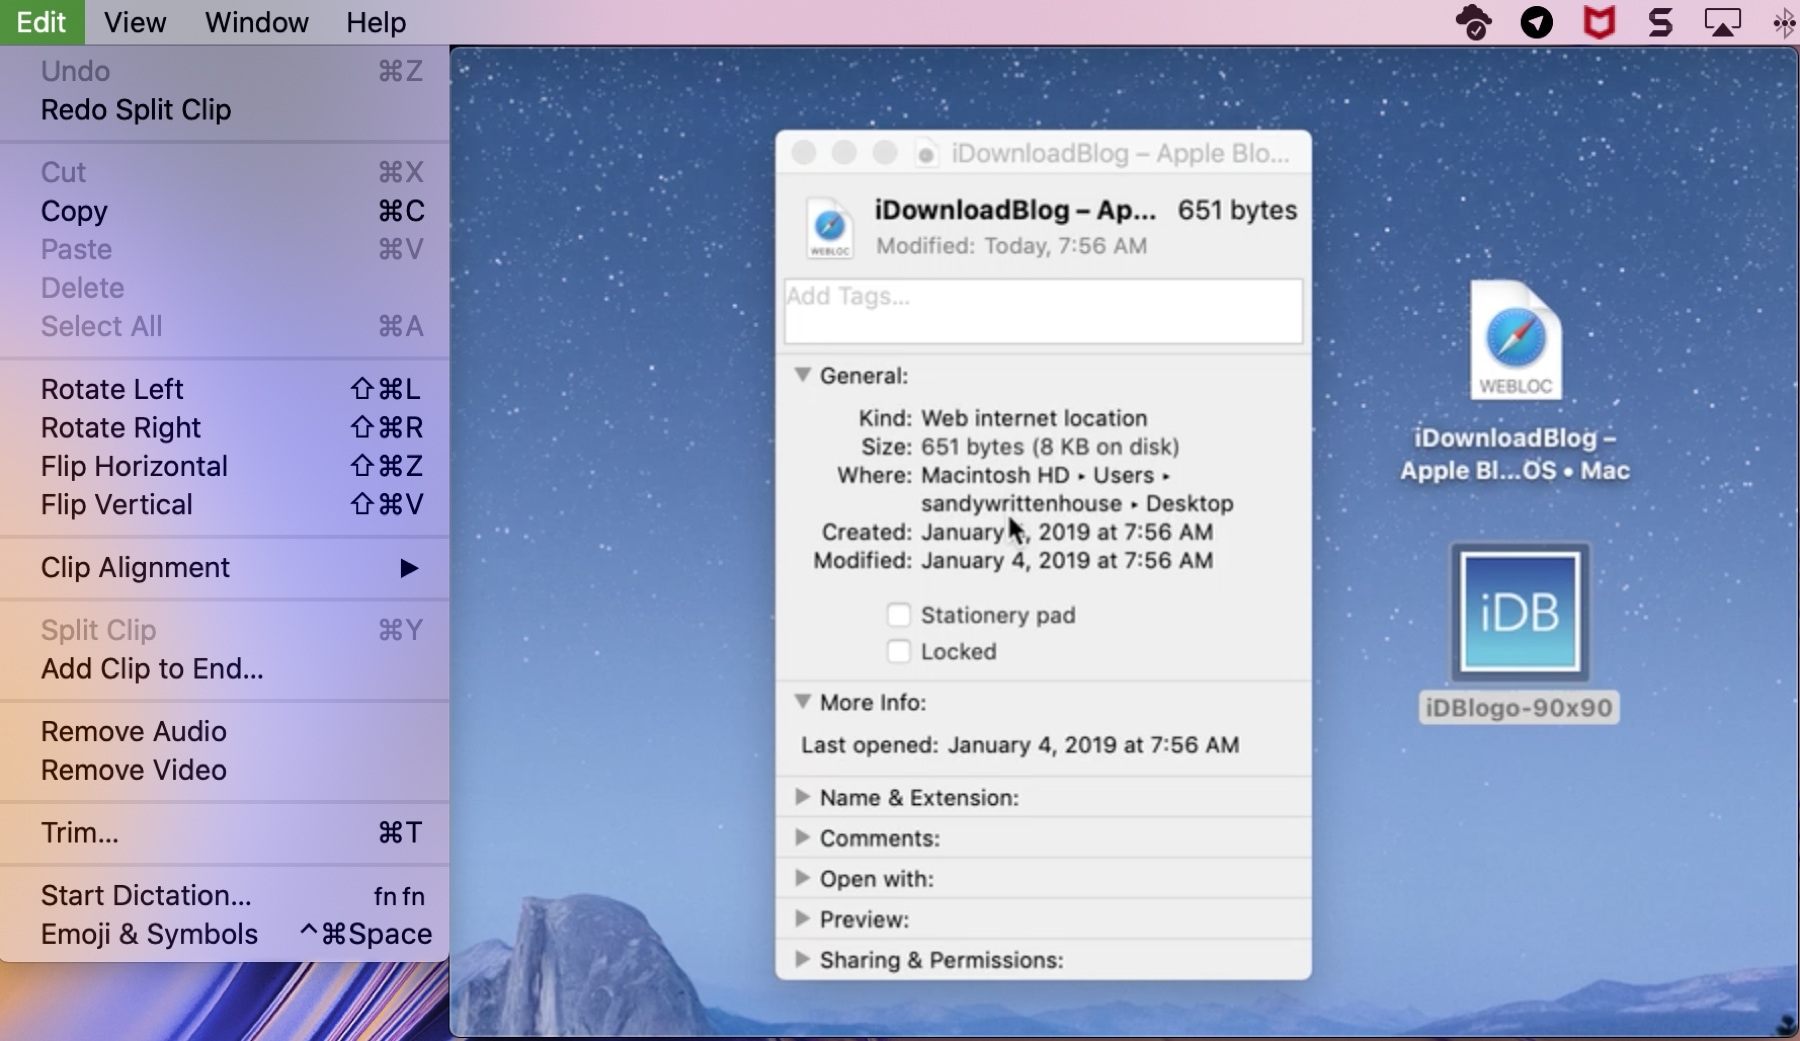 quicktime player for mac .avi